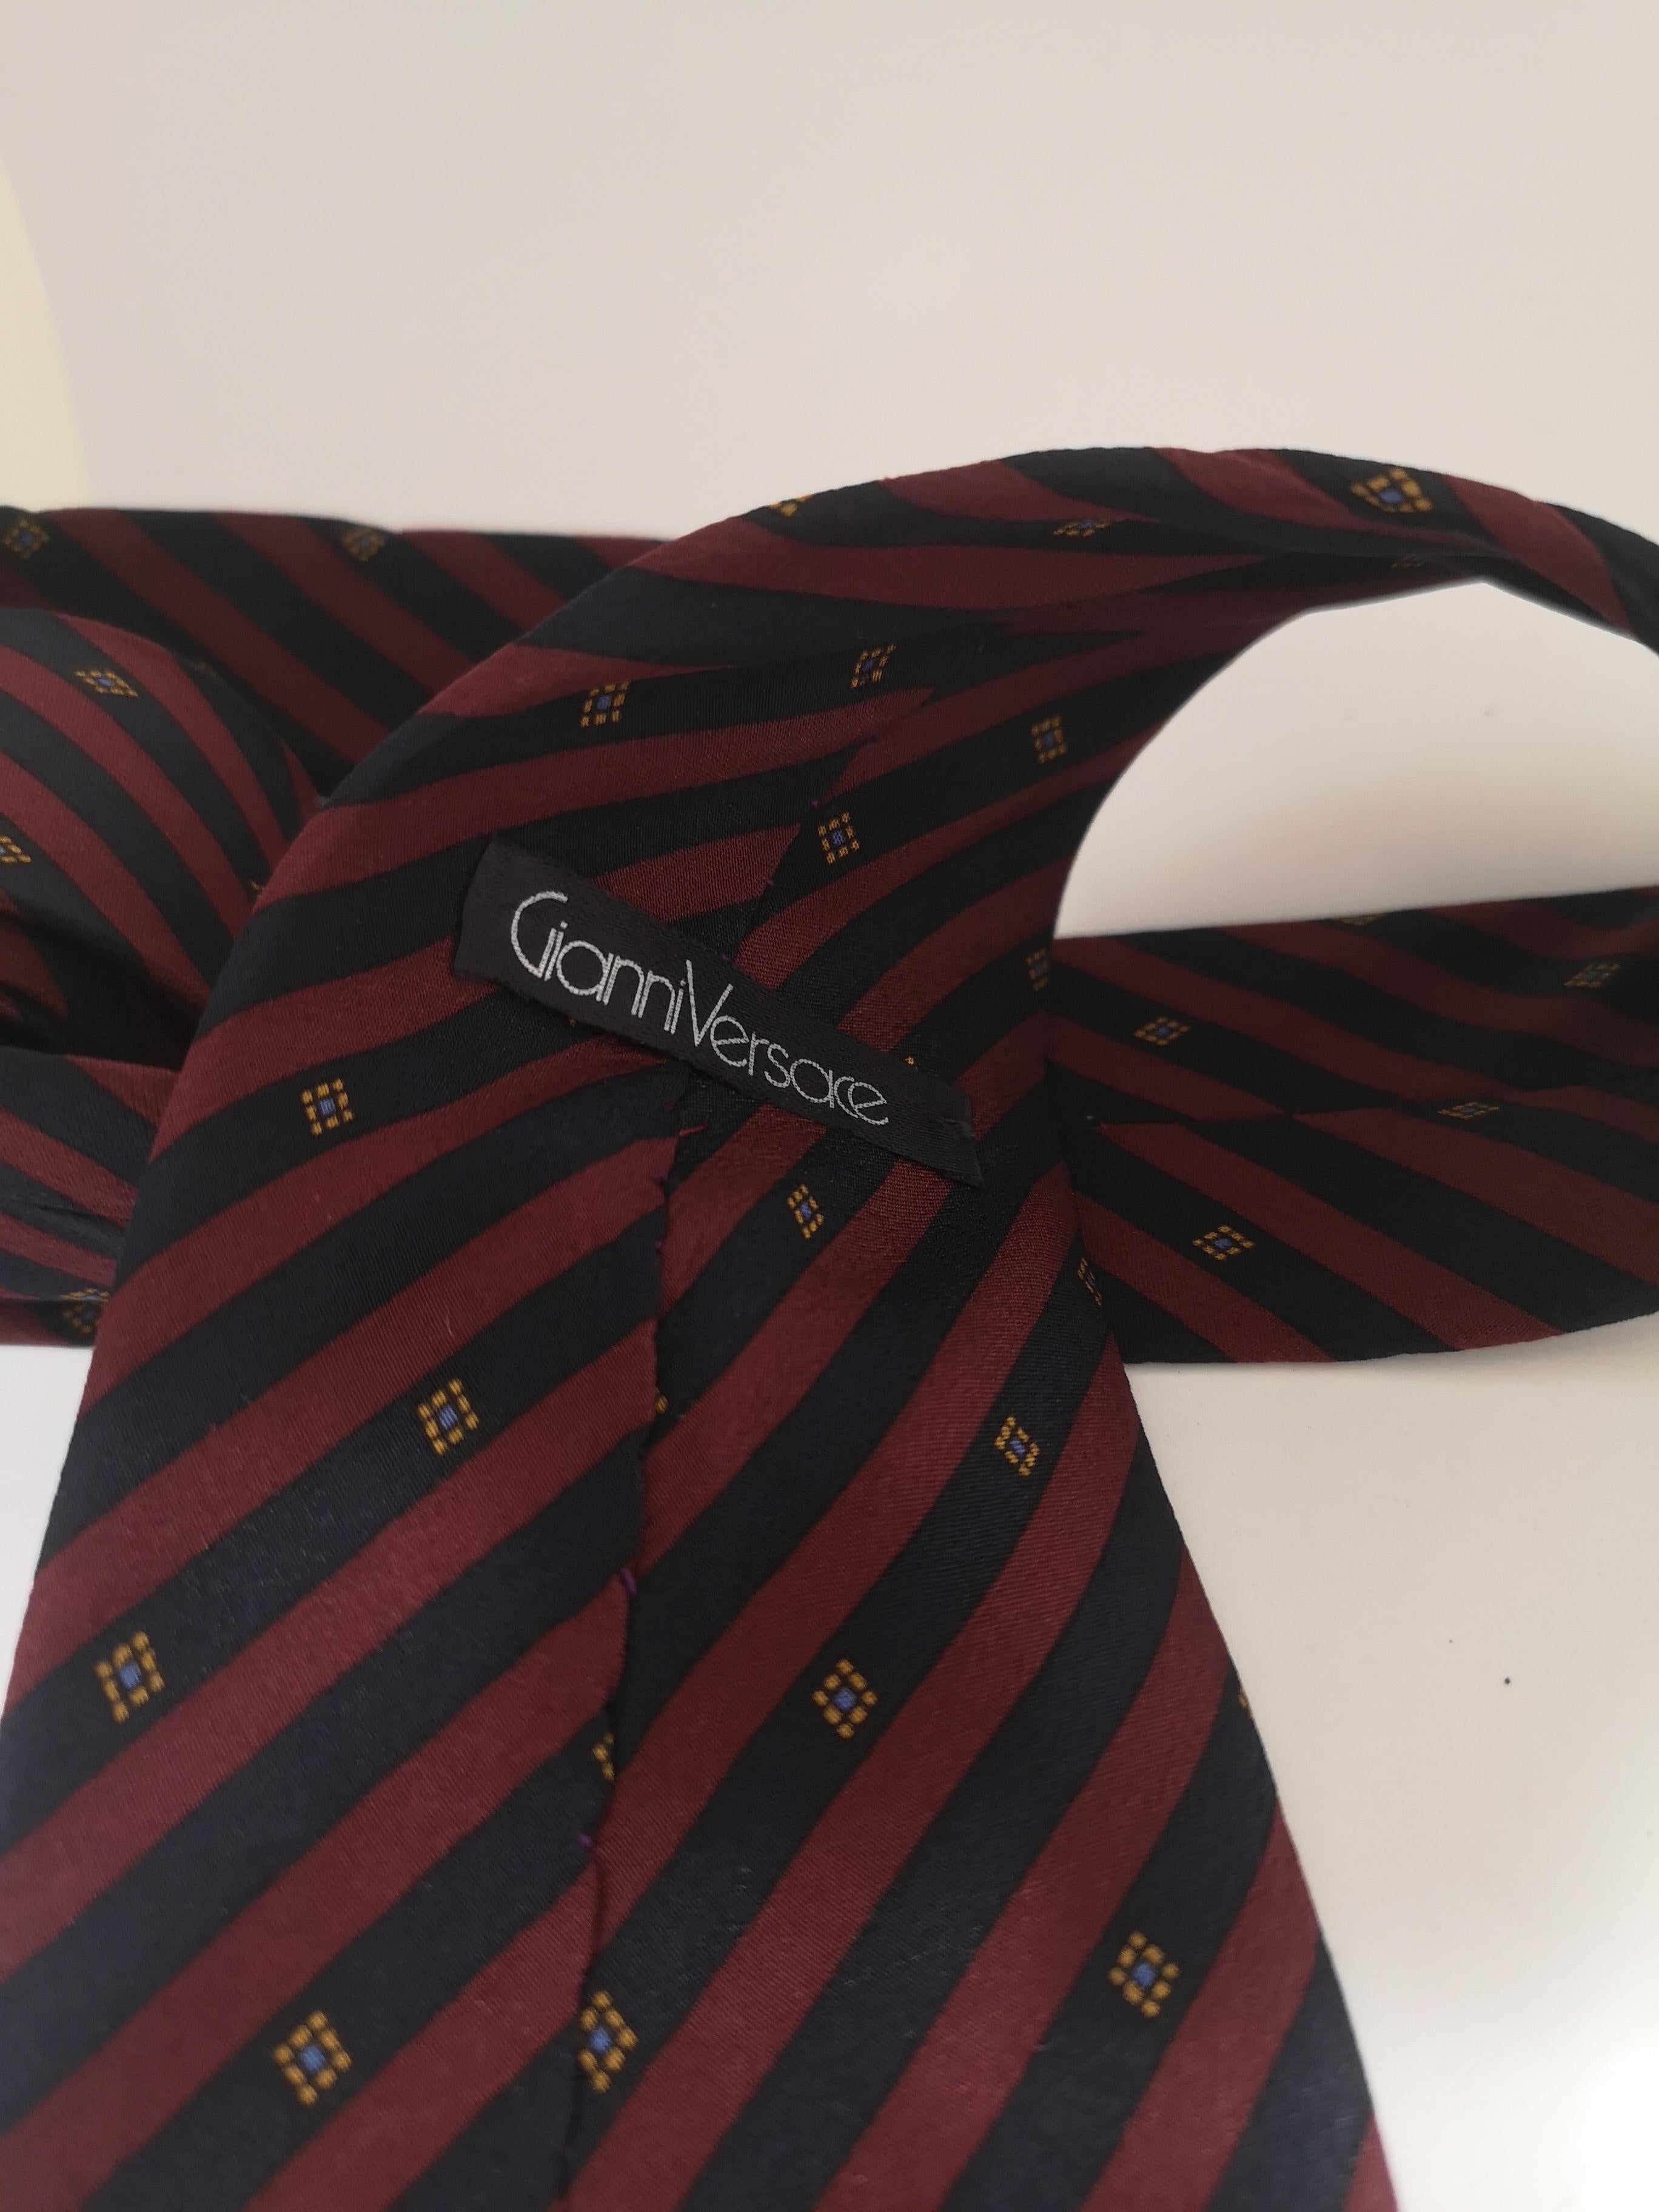 Gianni Versace Bordeaux blue silk tie
totally made in italy